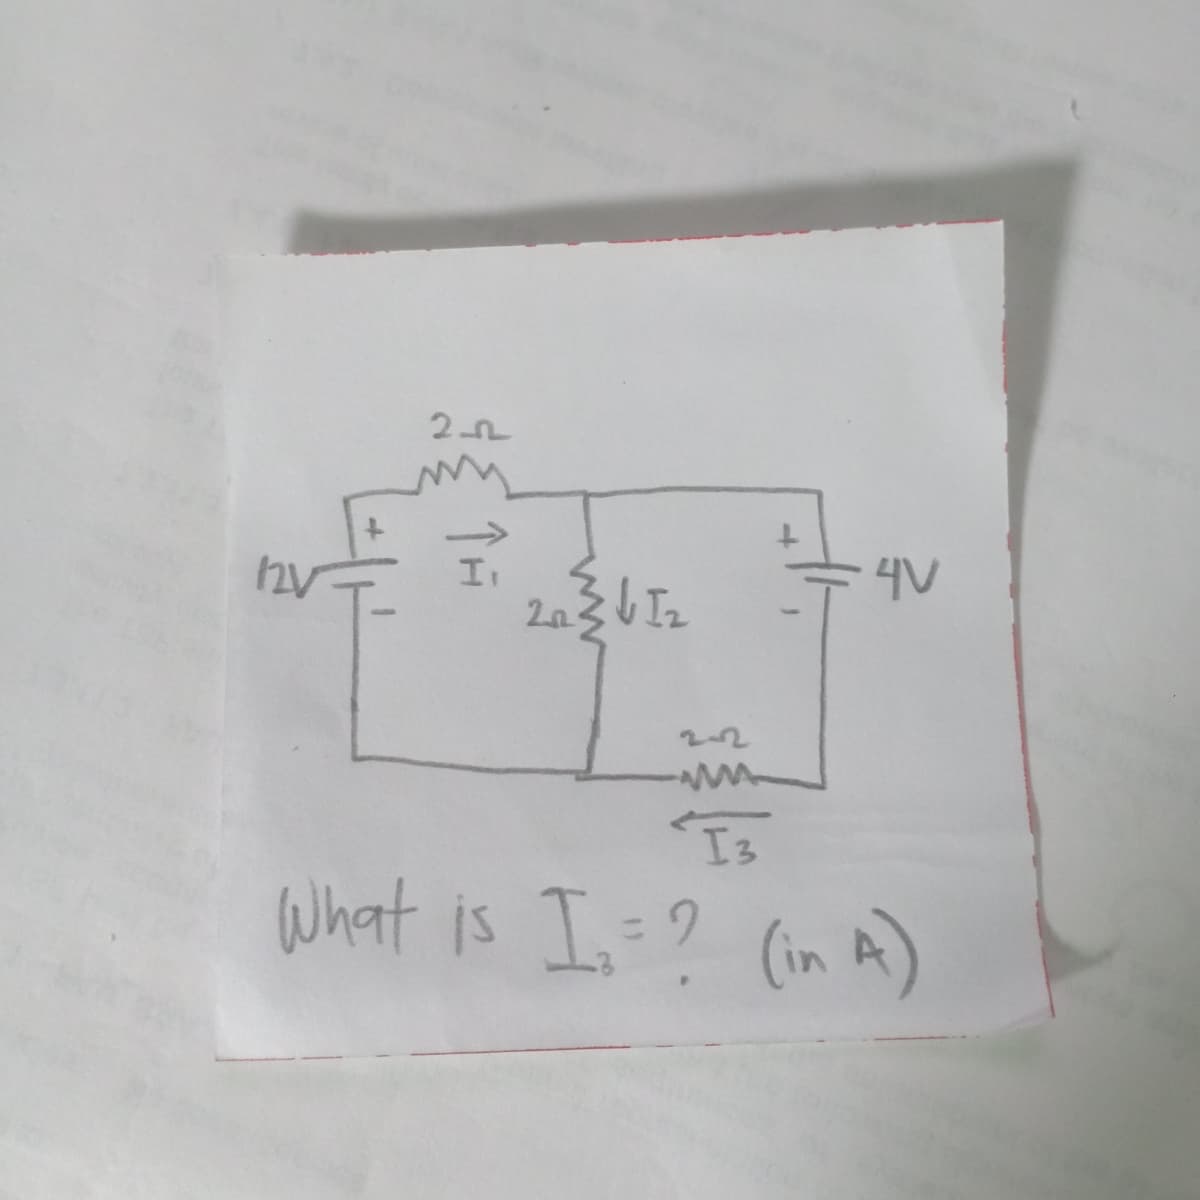 2-2
I,
ww
2₁ } √ [₂
20
2-2
=4V
I3
What is I ₂ = ? (in A)